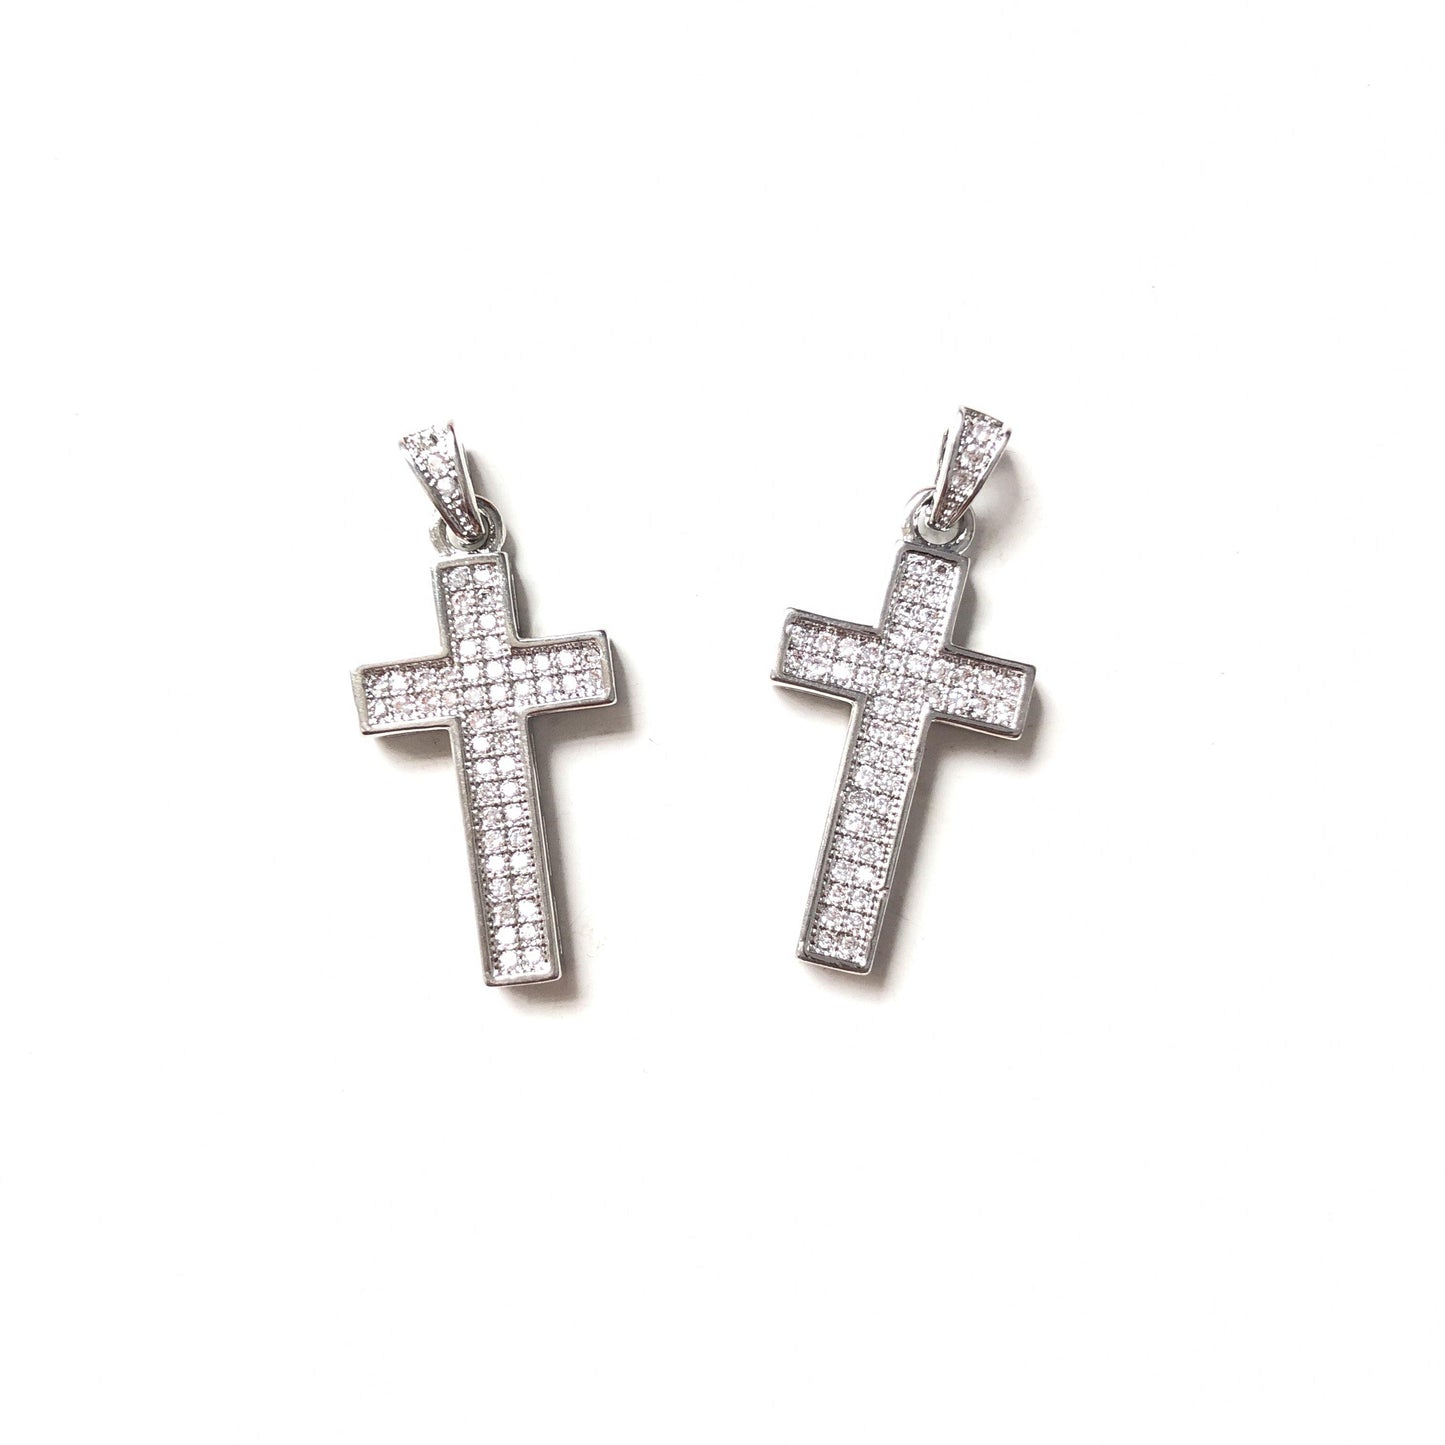 10pcs/lot 25*13mm CZ Paved Cross Charms Silver CZ Paved Charms Crosses Charms Beads Beyond